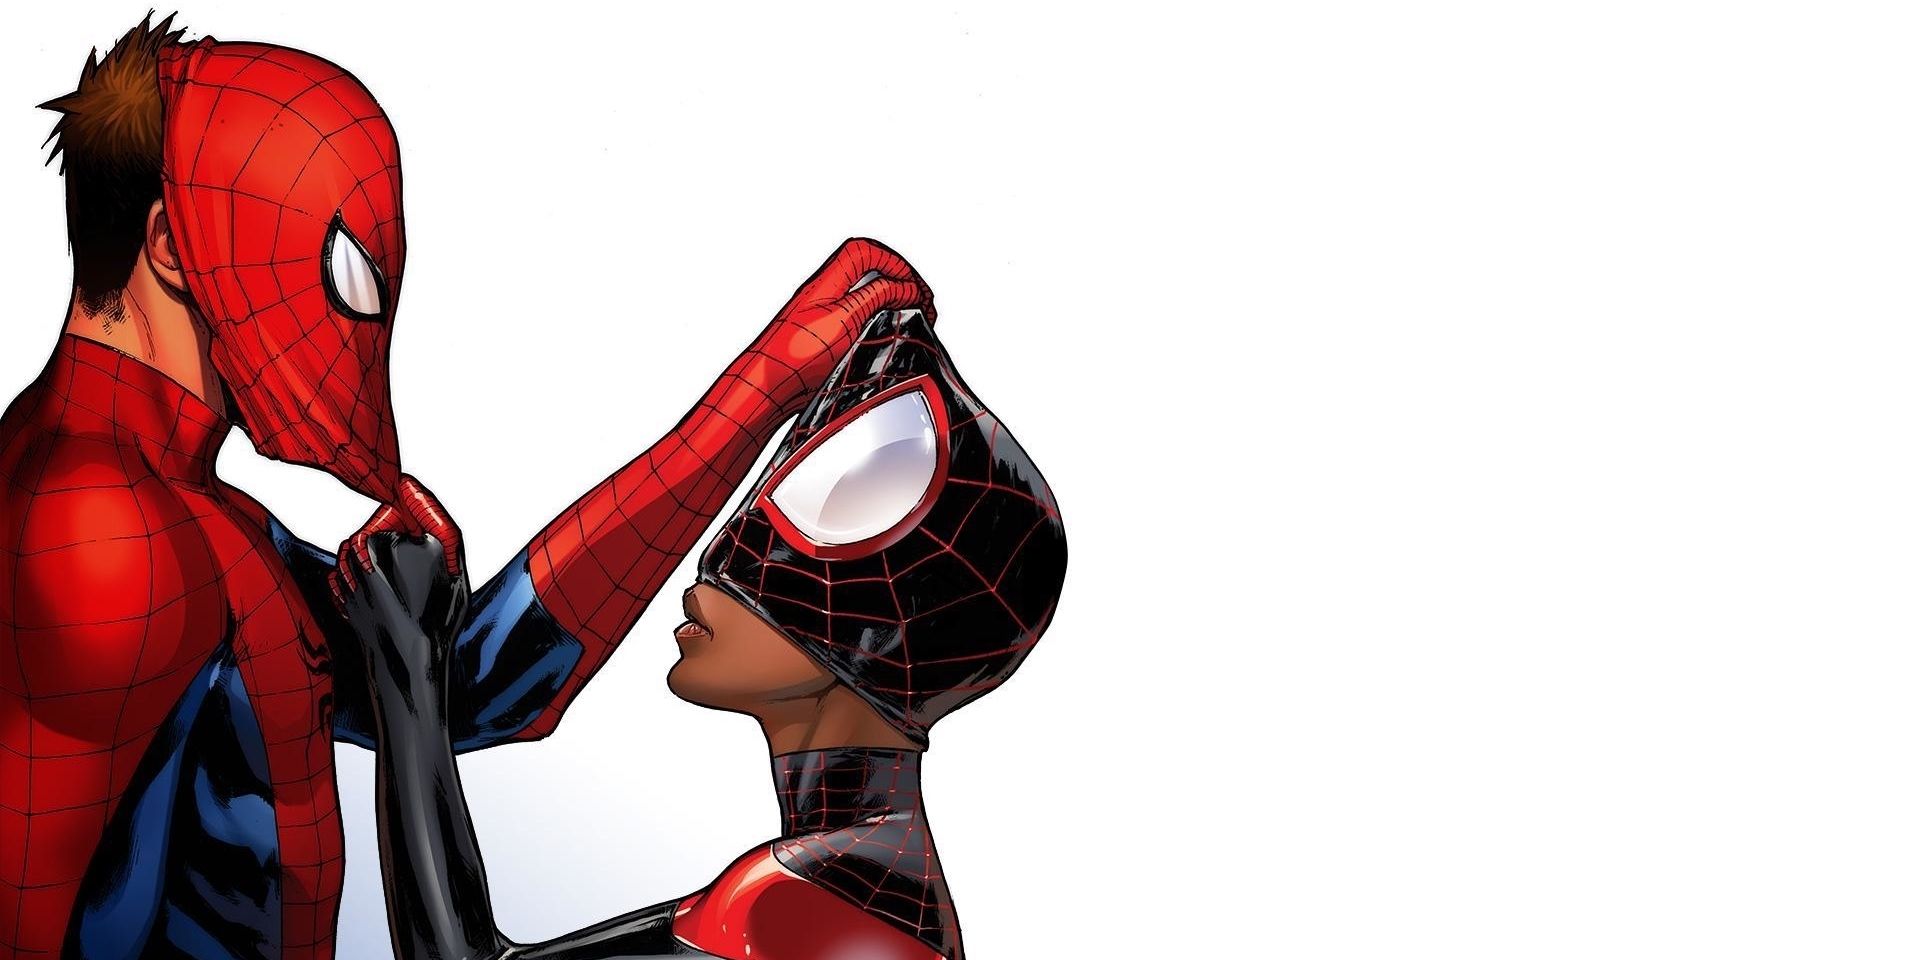 Peter Parker and Miles Morales unmask each other in the Spider-Man comics